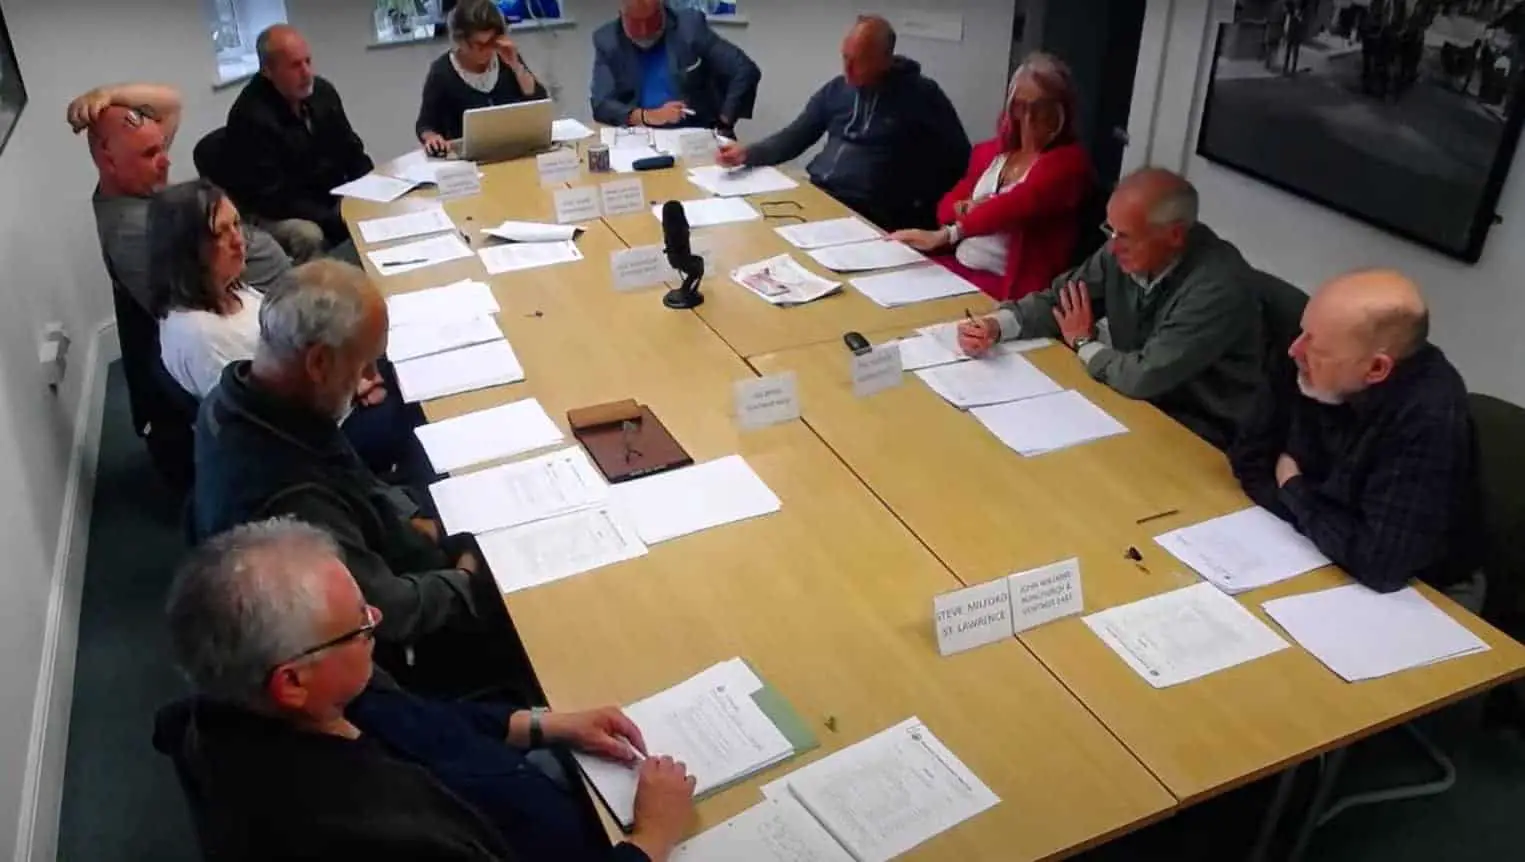 ventnor town council meeting from youtube video